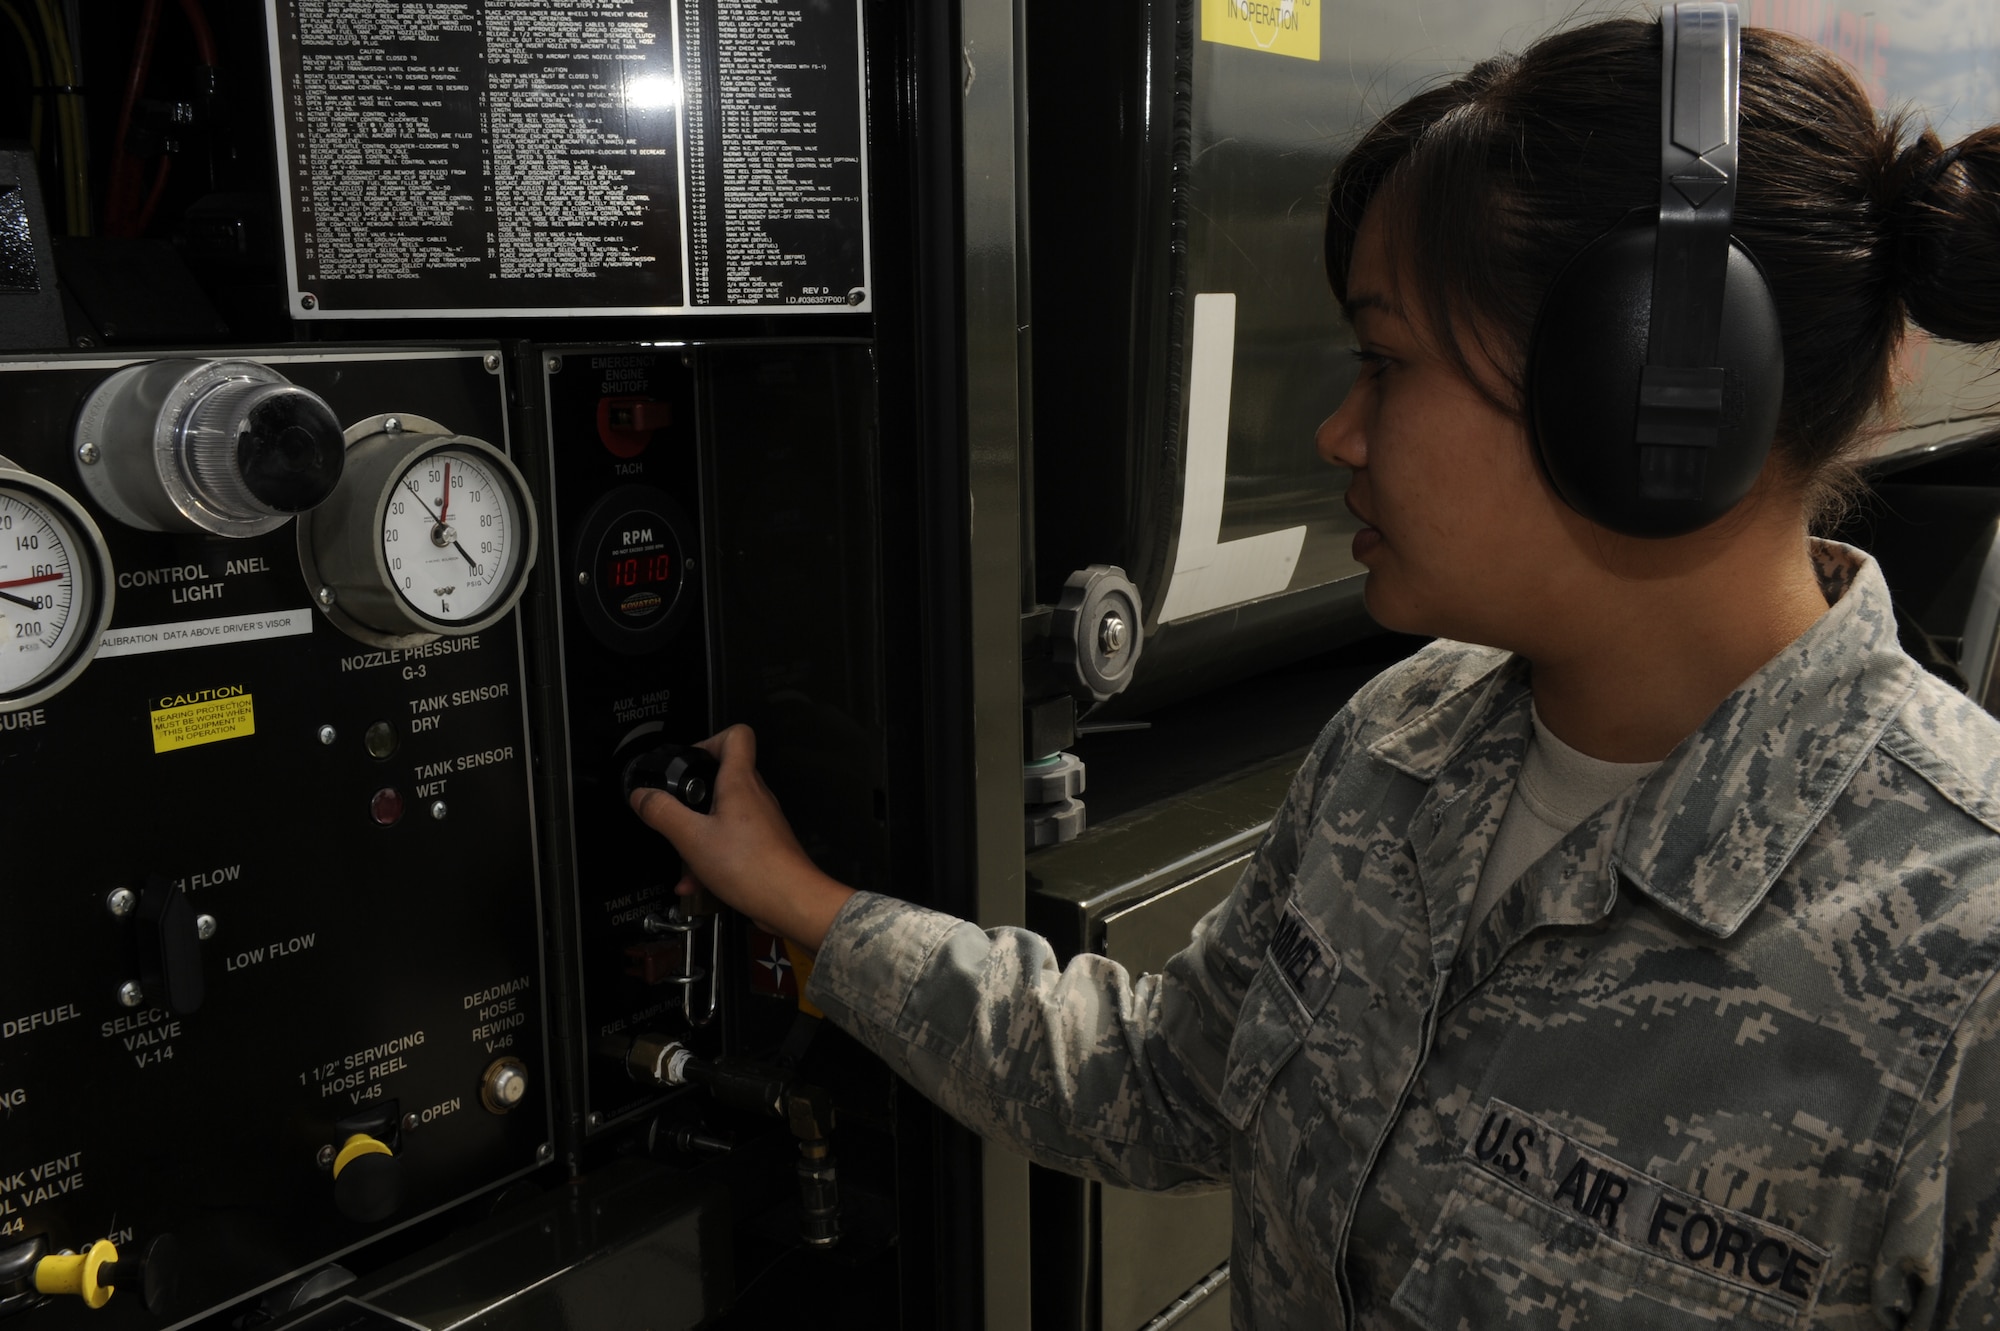 Senior Airman Janine Trammel, 86th Logistics Readiness Squadron, fuels technician, checks a panel pressure display on Ramstein Air Base, Germany, July 10, 2012. Fuels help support this mission by continuously providing quality grade jet fuel. (U.S. Air Force photo/ Senior Airman Aaron-Forrest Wainwright)